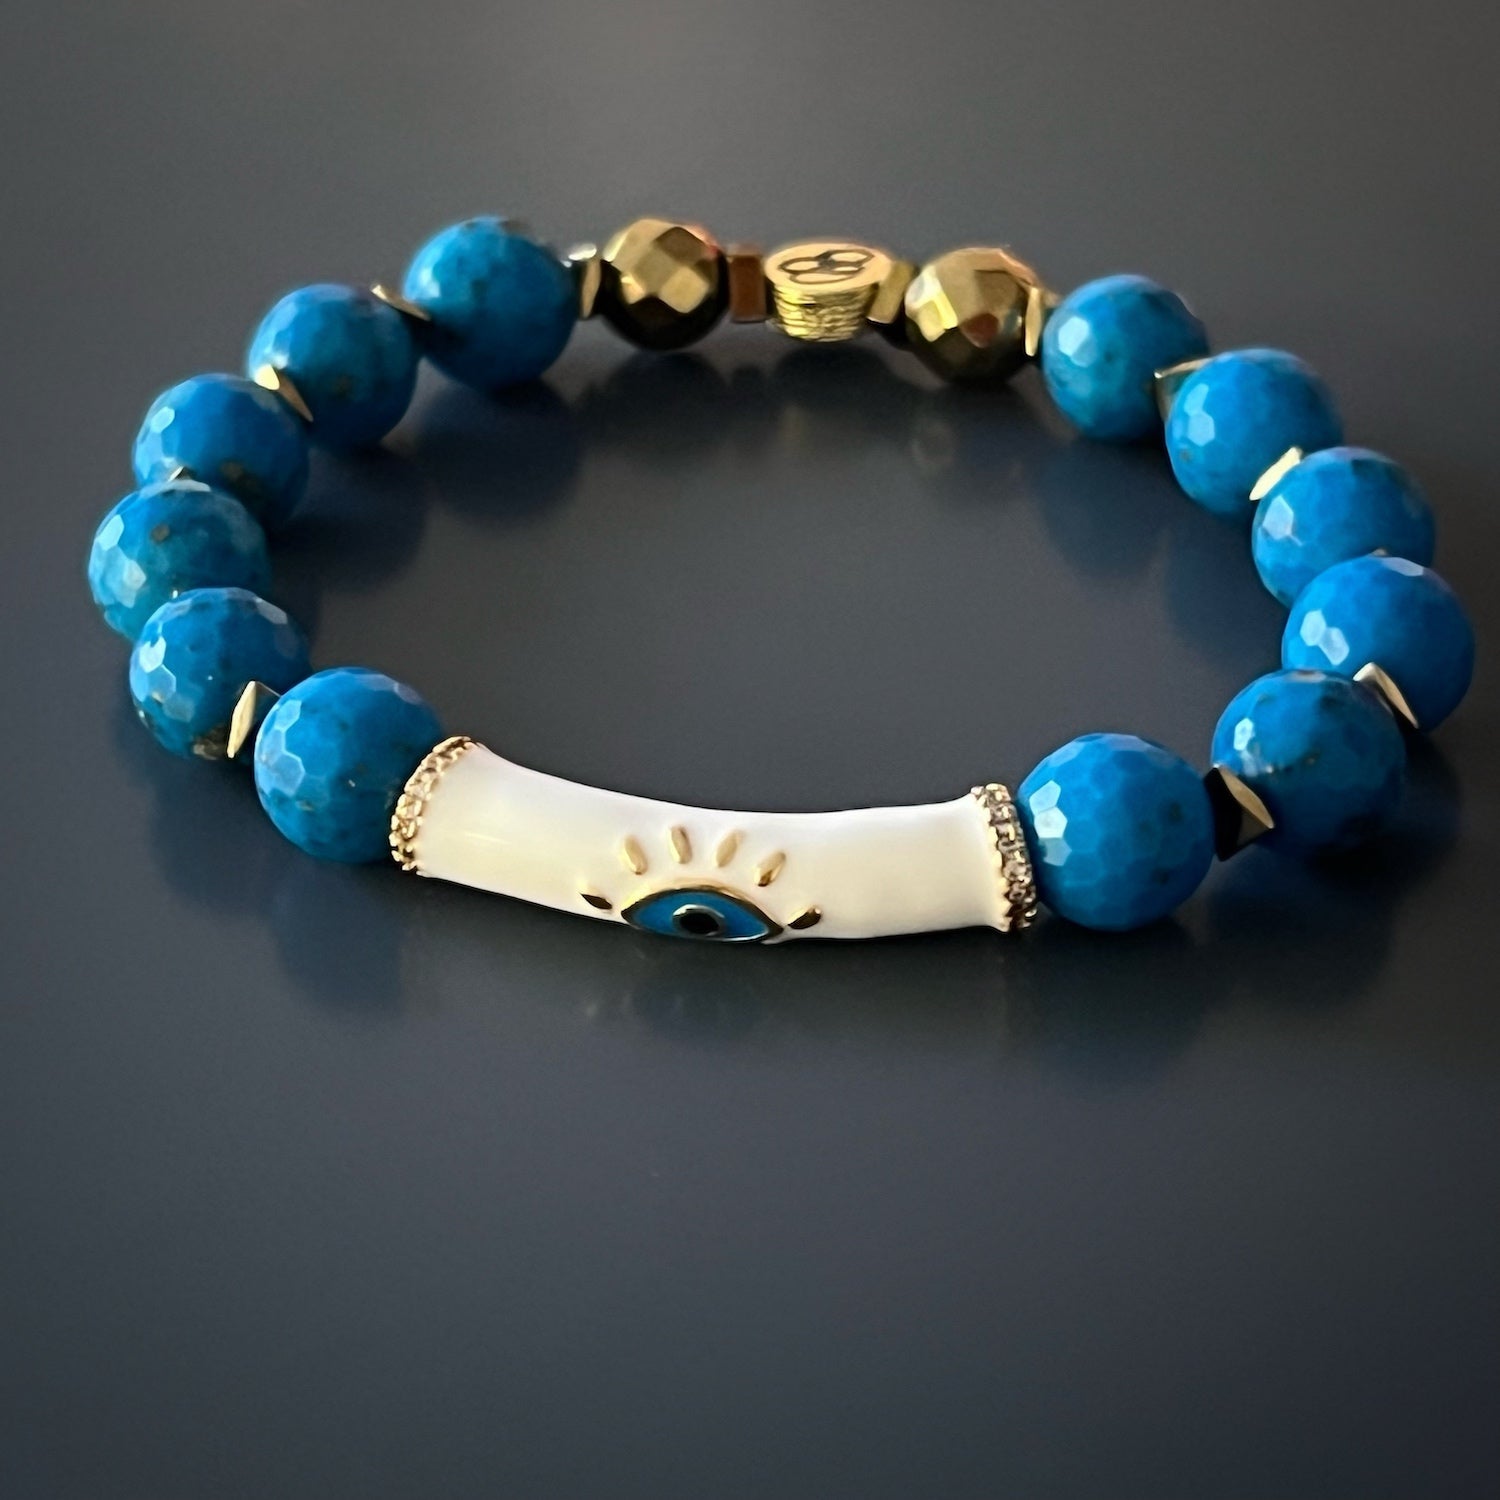 The Turquoise Inner Calm Bracelet radiates beauty and tranquility, adorned with gold-plated accents and faceted turquoise stones.